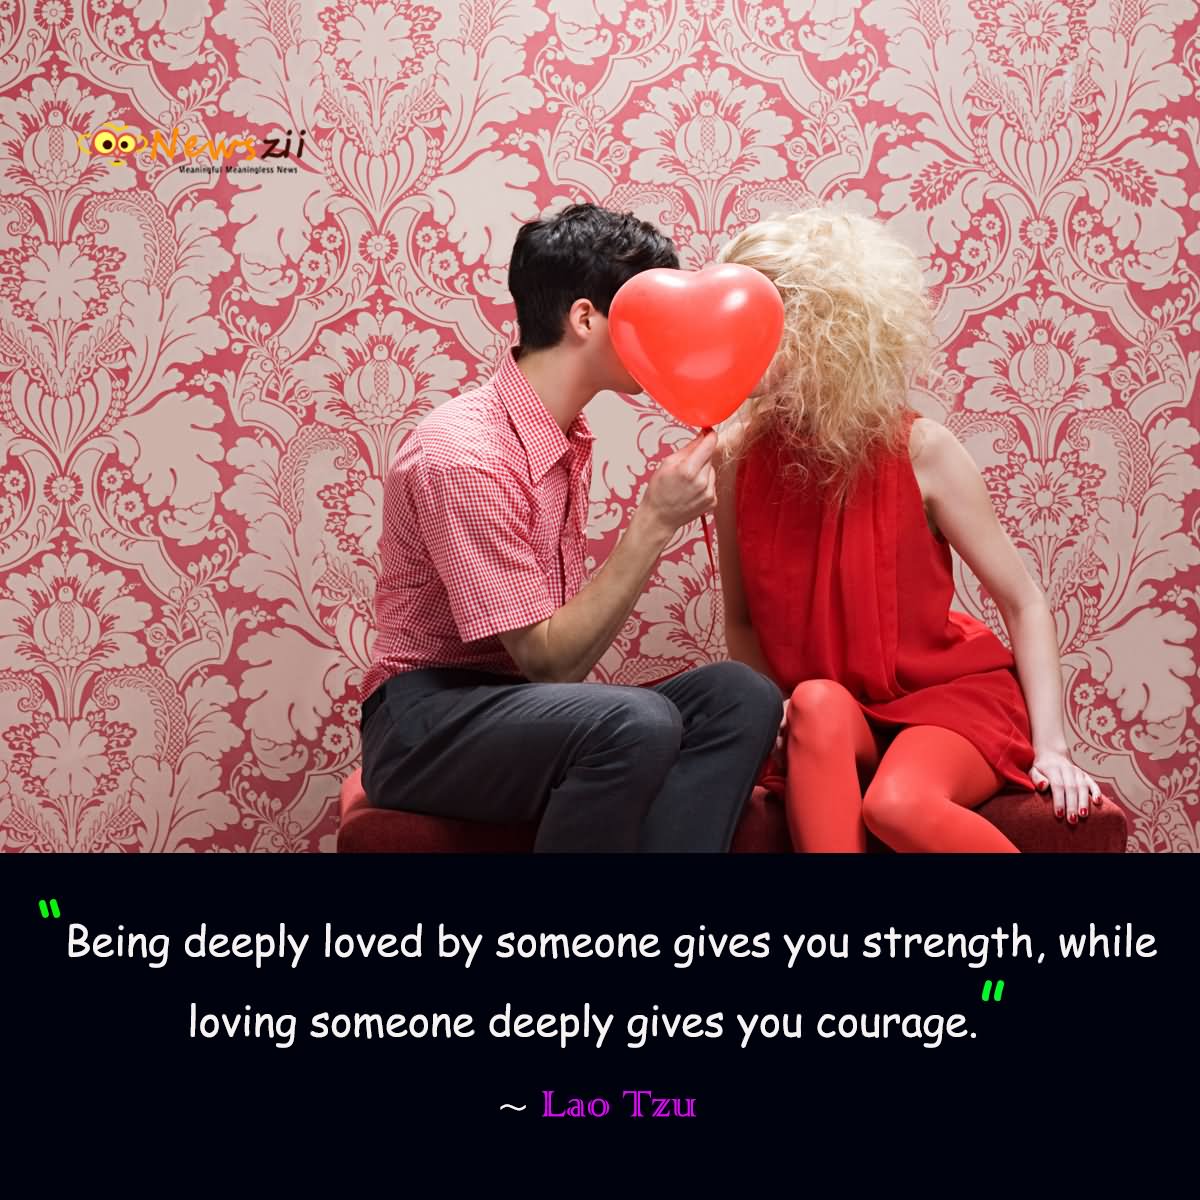 Being deeply loved by someone gives you strength,while loving someone deeply gives you courage.